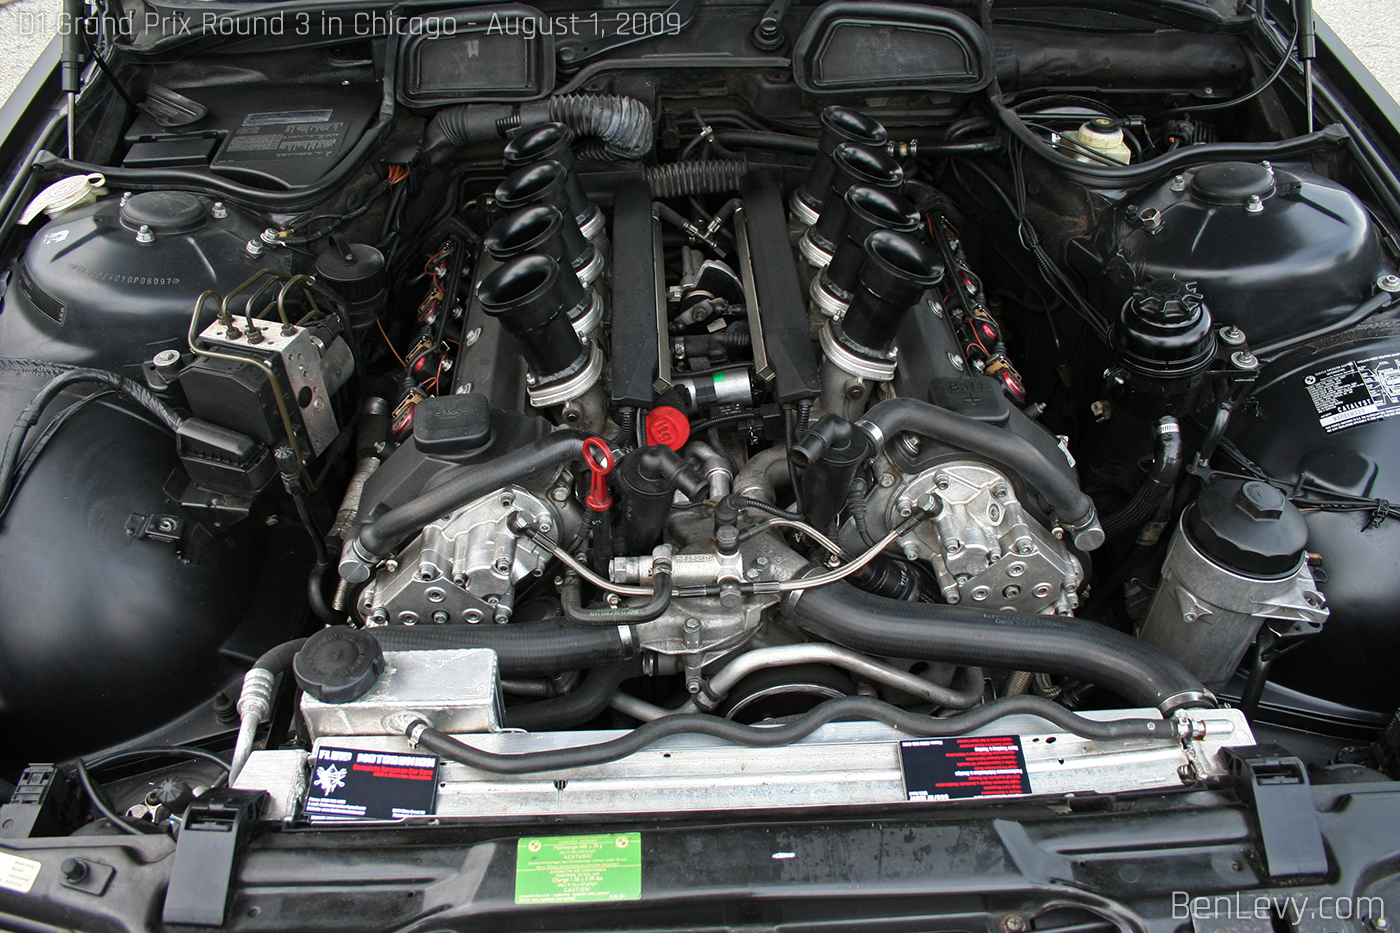 2000 BMW M5 S62 motor in 740iL